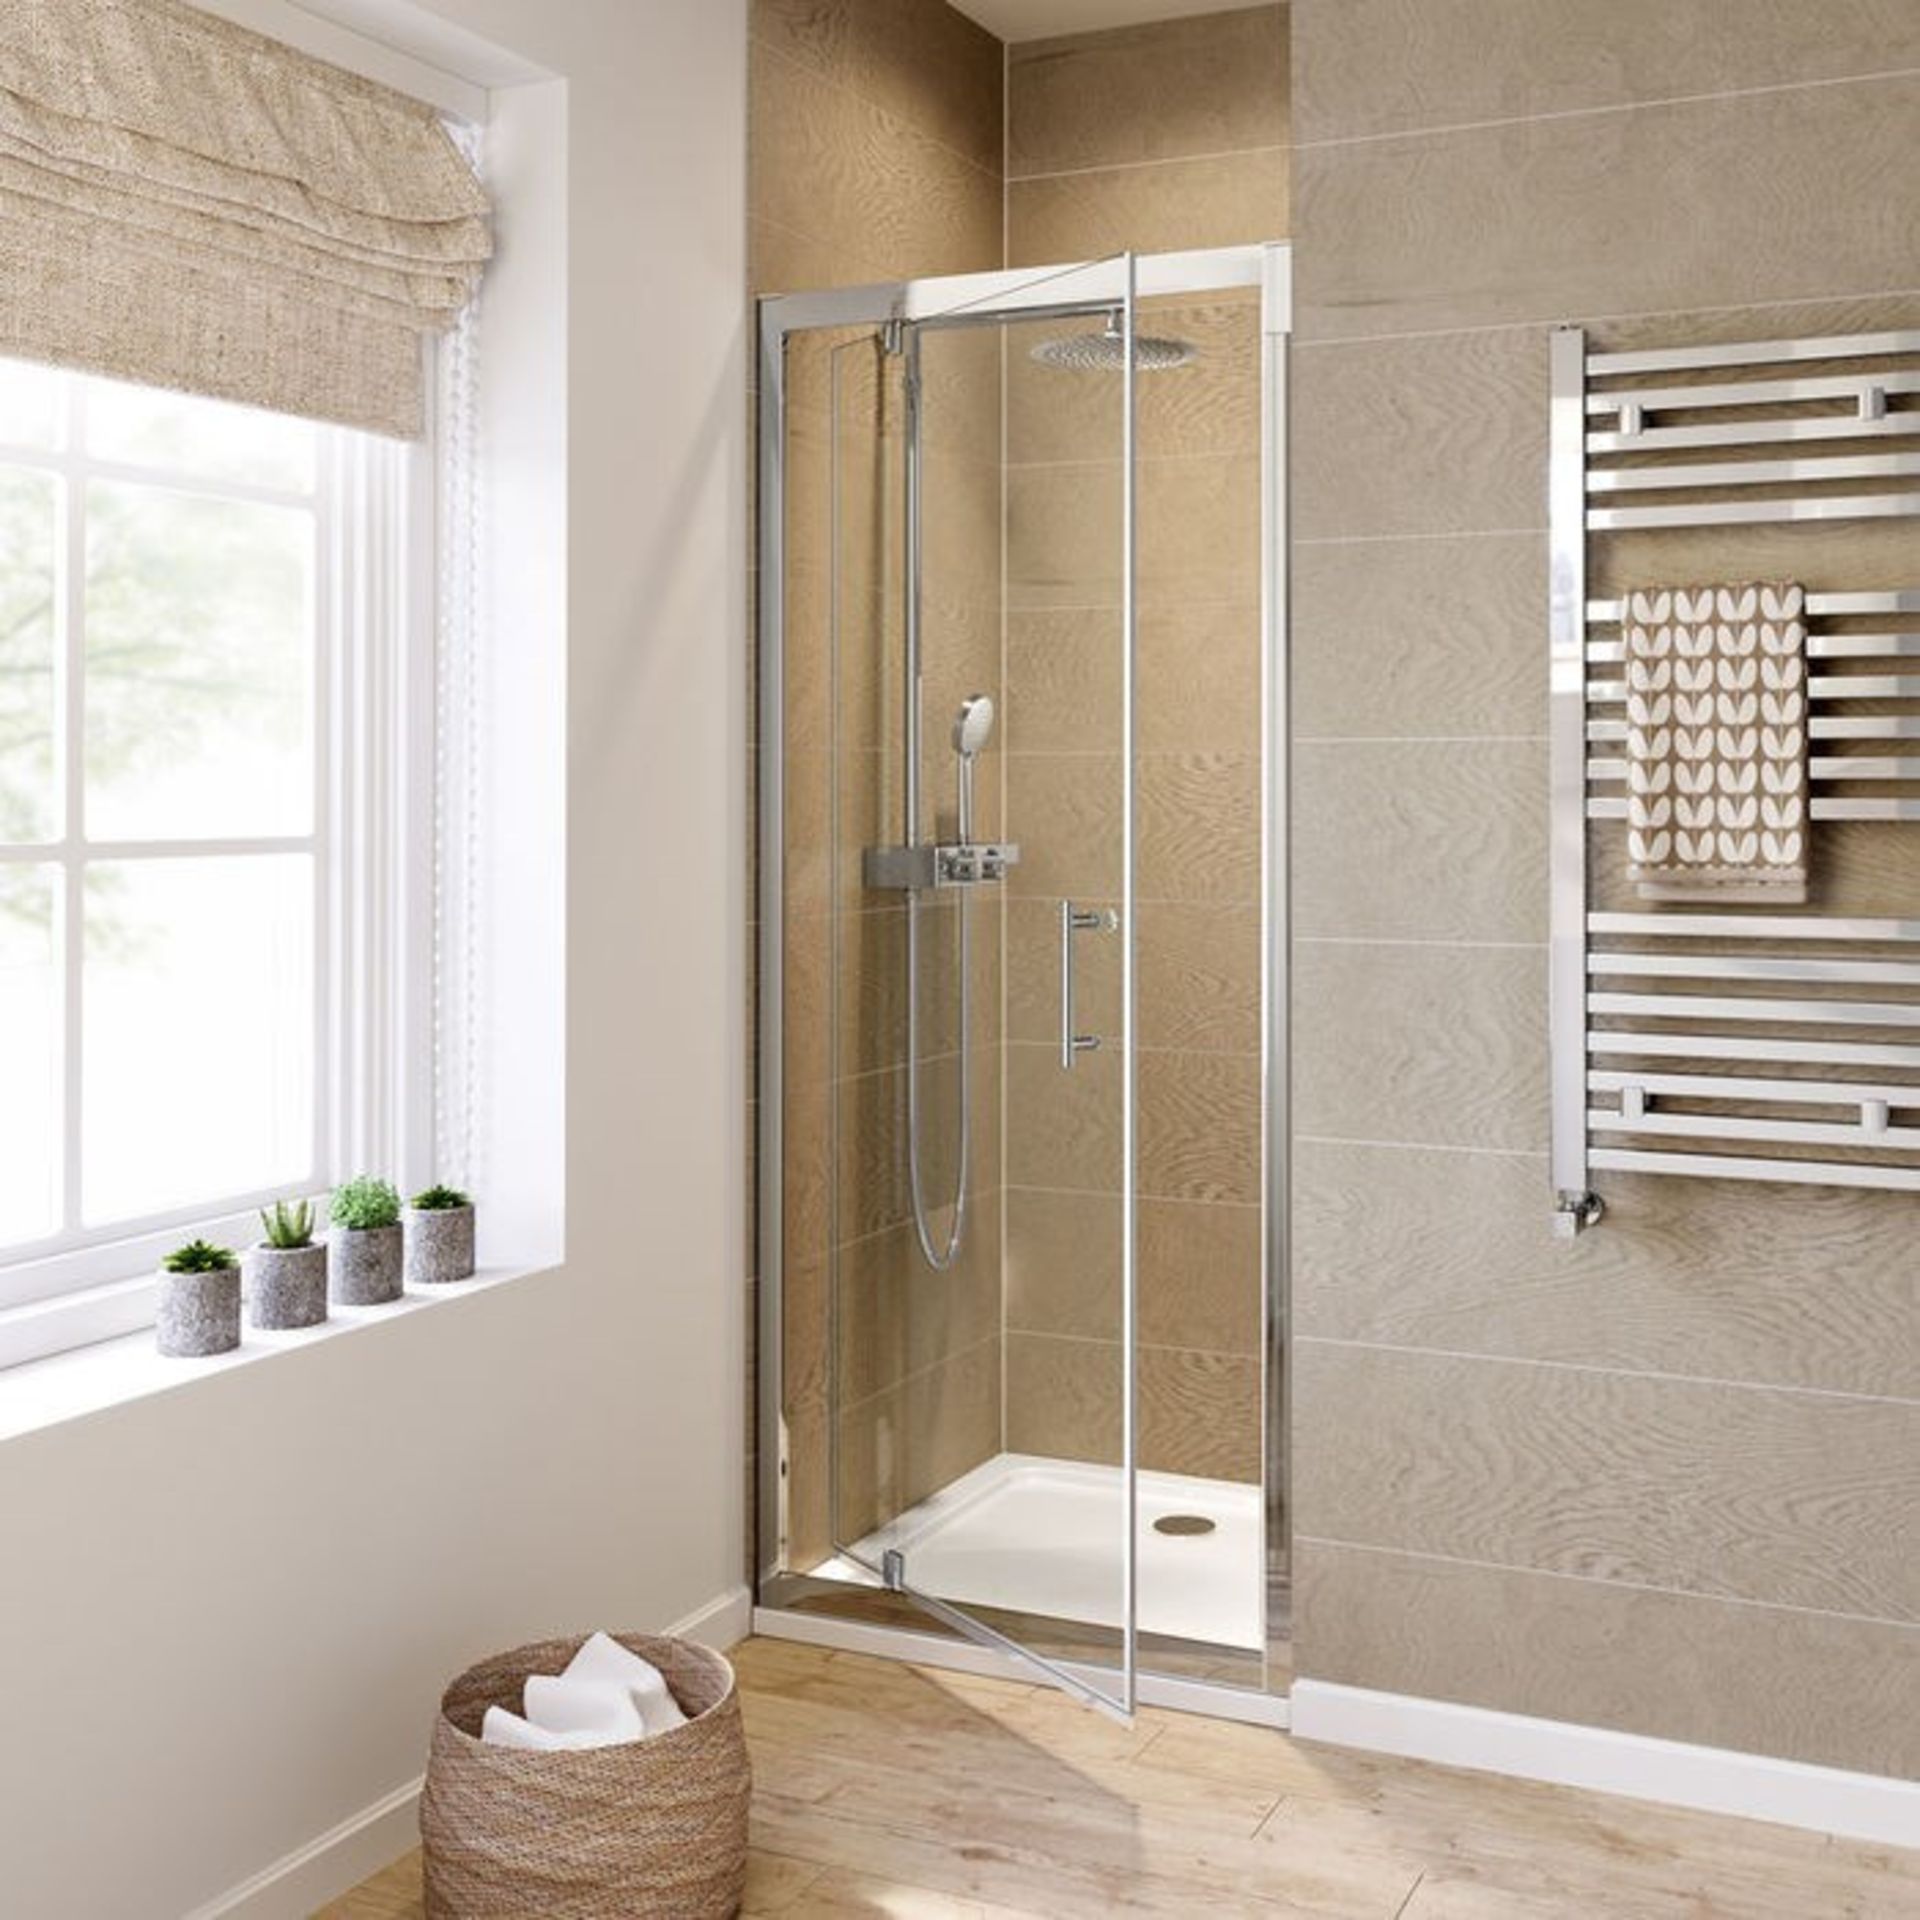 Twyfords 700mm - 6mm - Premium Pivot Shower Door. RRP £299.99.8mm Safety Glass Fully wate... - Image 2 of 2